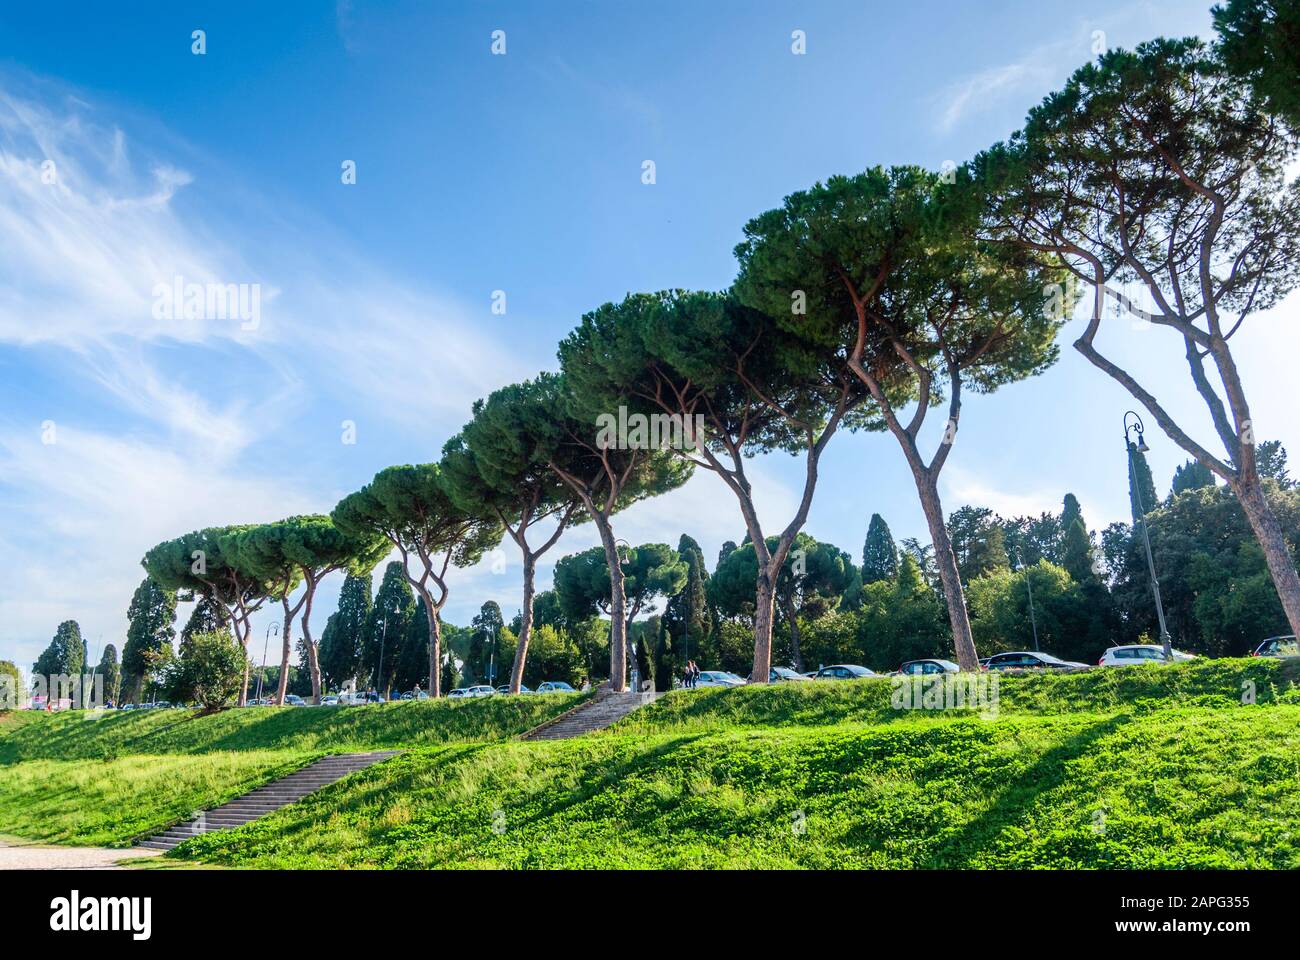 Italian Stone Pines Pinus Pinea also known as Umbrella Pines and Parasol  Pines, tall trees near Aventine Hill, Rome. Italy Stock Photo - Alamy